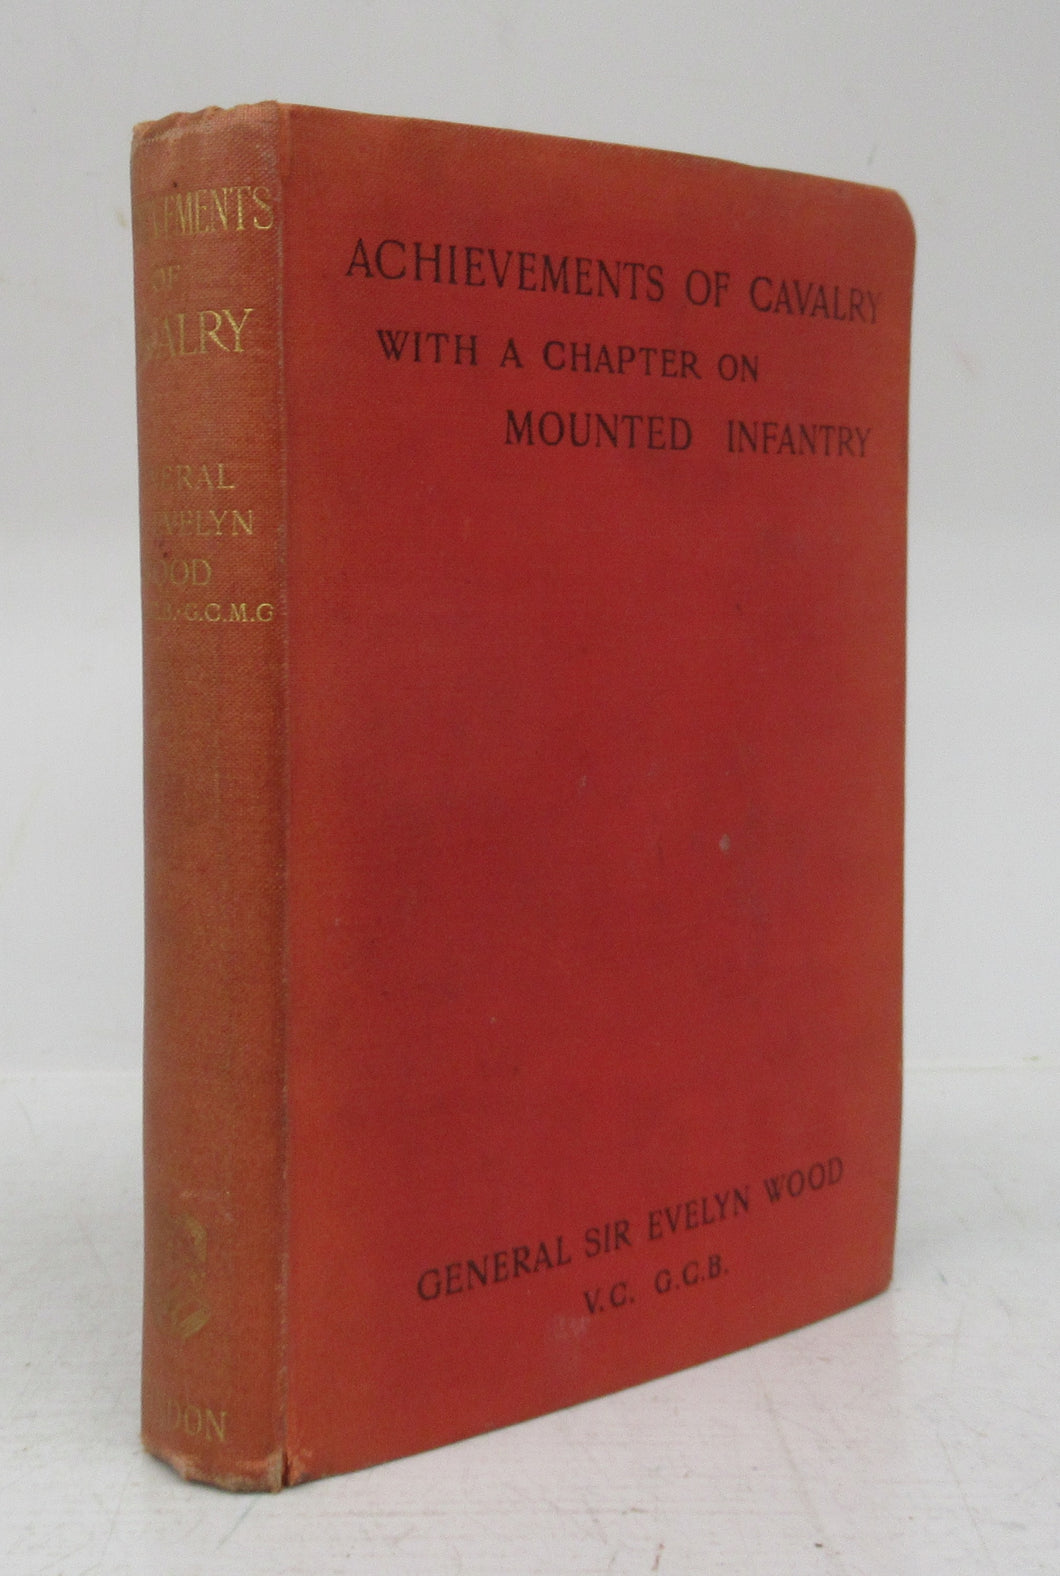 Achievements of Cavalry with a Chapter on Mounted Infantry